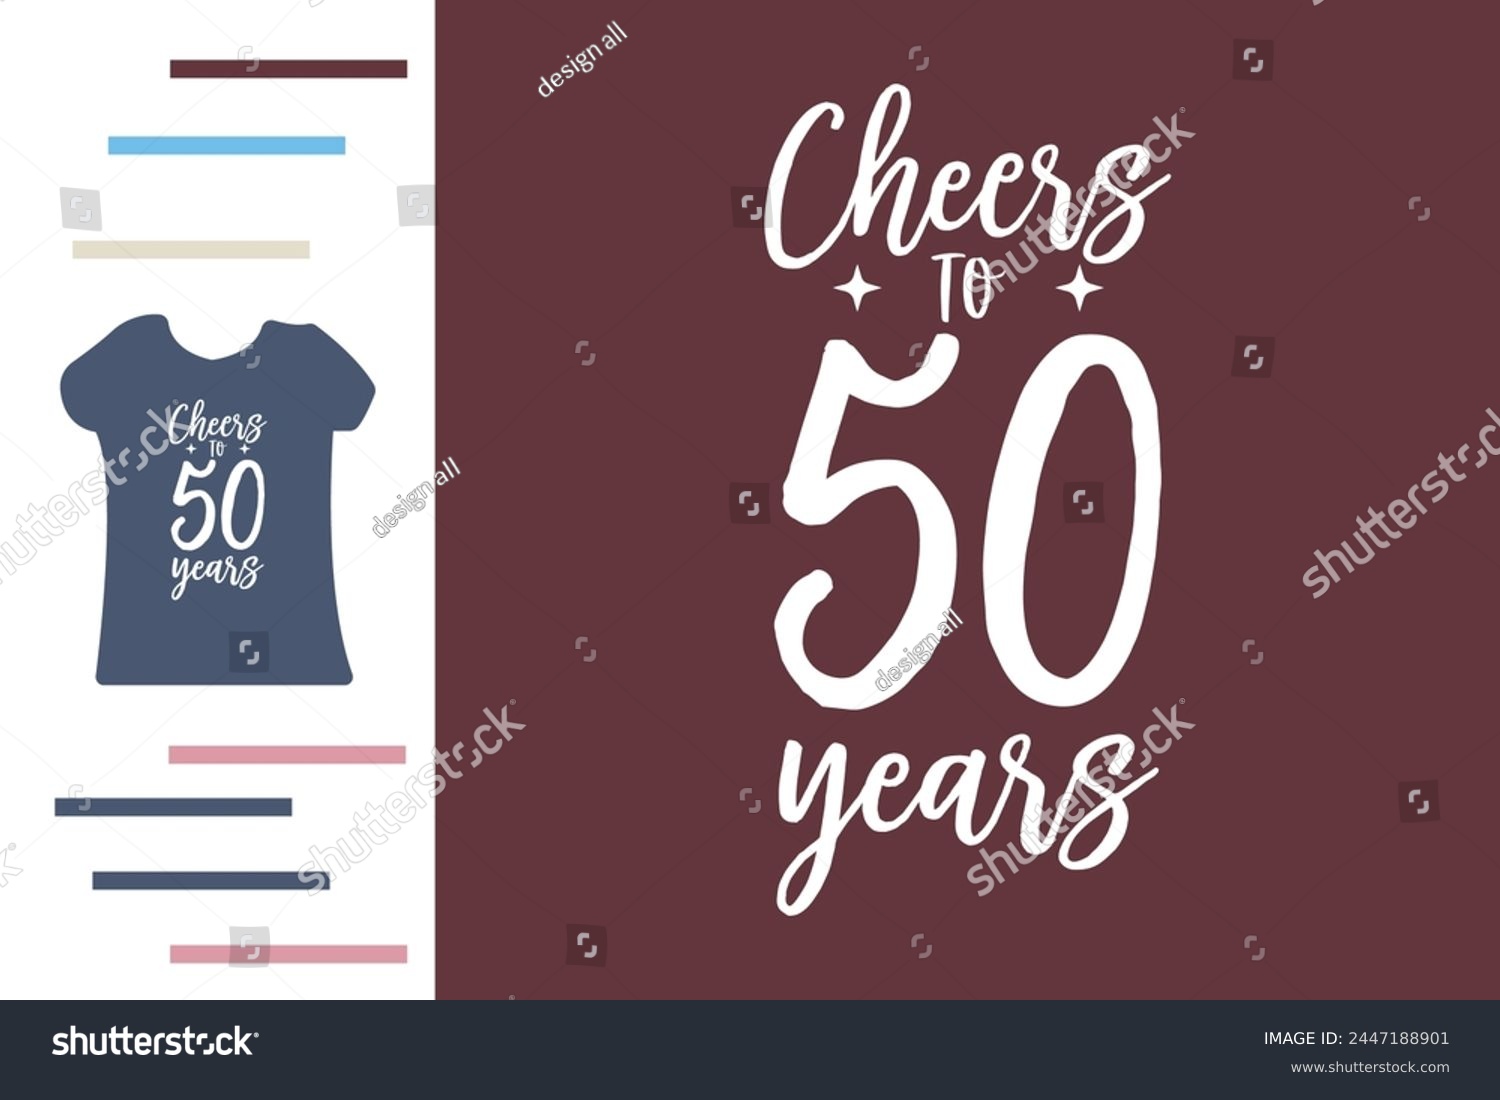 SVG of Cheers to 50 years t shirt design svg